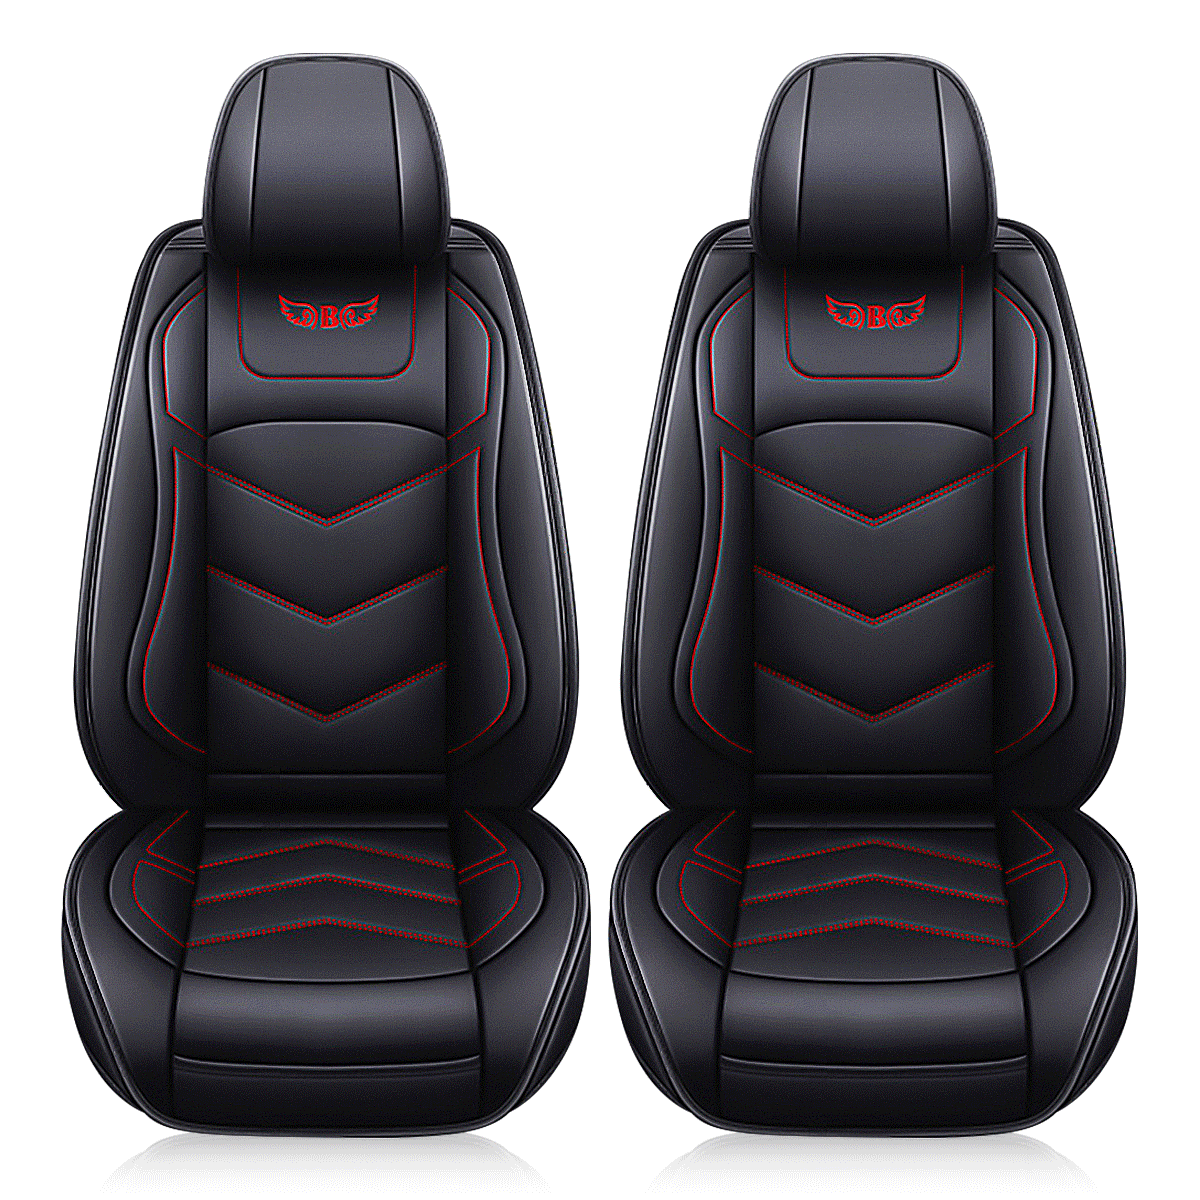 2pcs Black PU Leather Car Front Seat Covers Protector Cushion Mat Wear Resistant